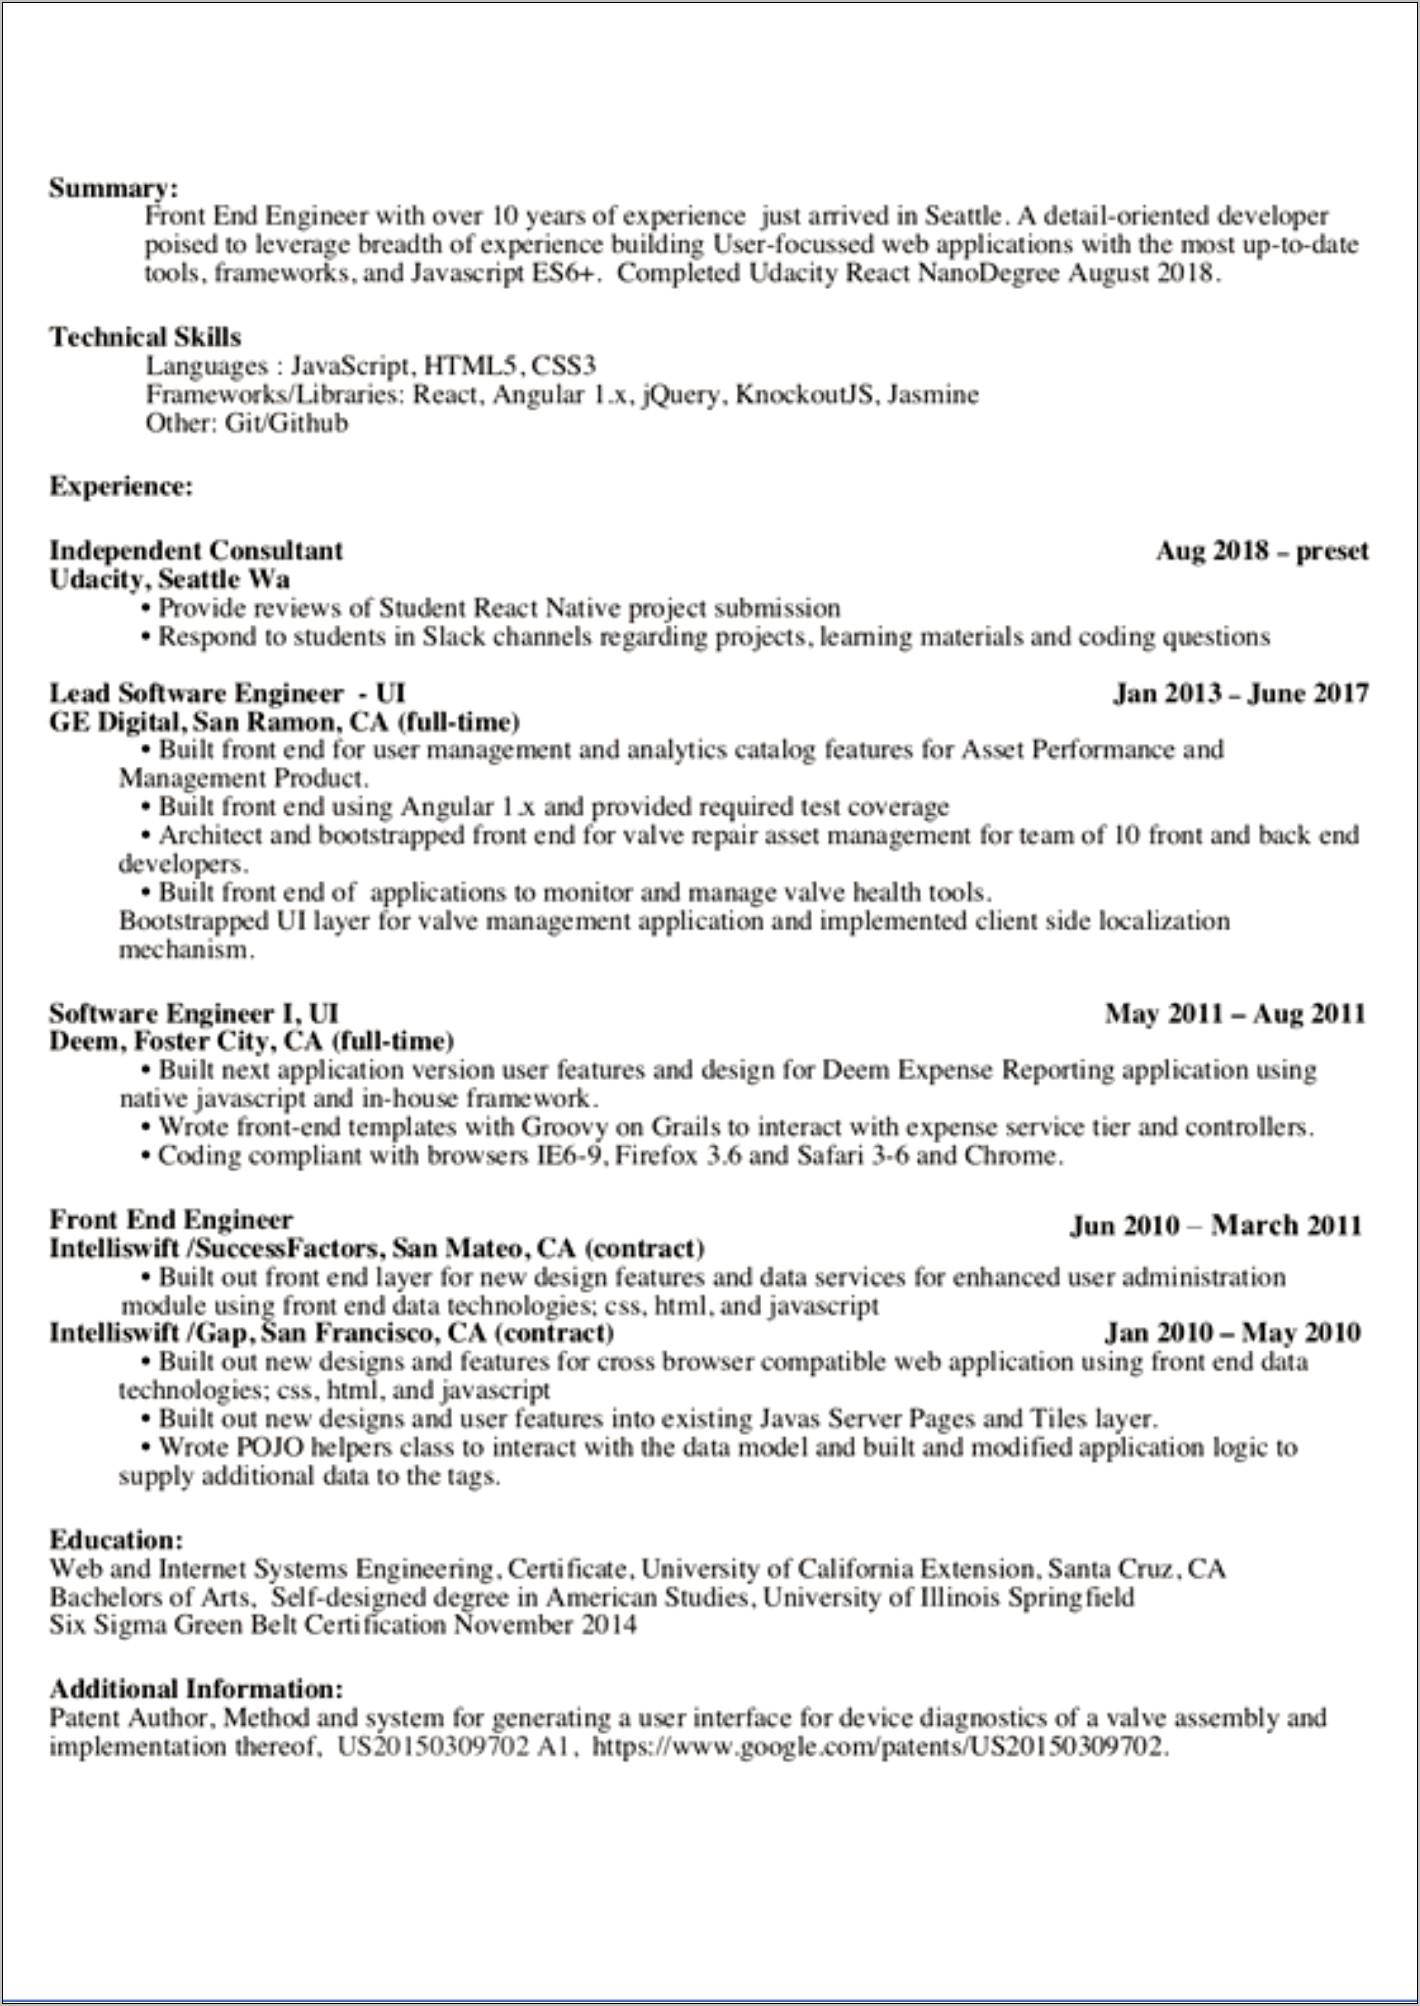 Example Resume With Six Sigma Green Belt